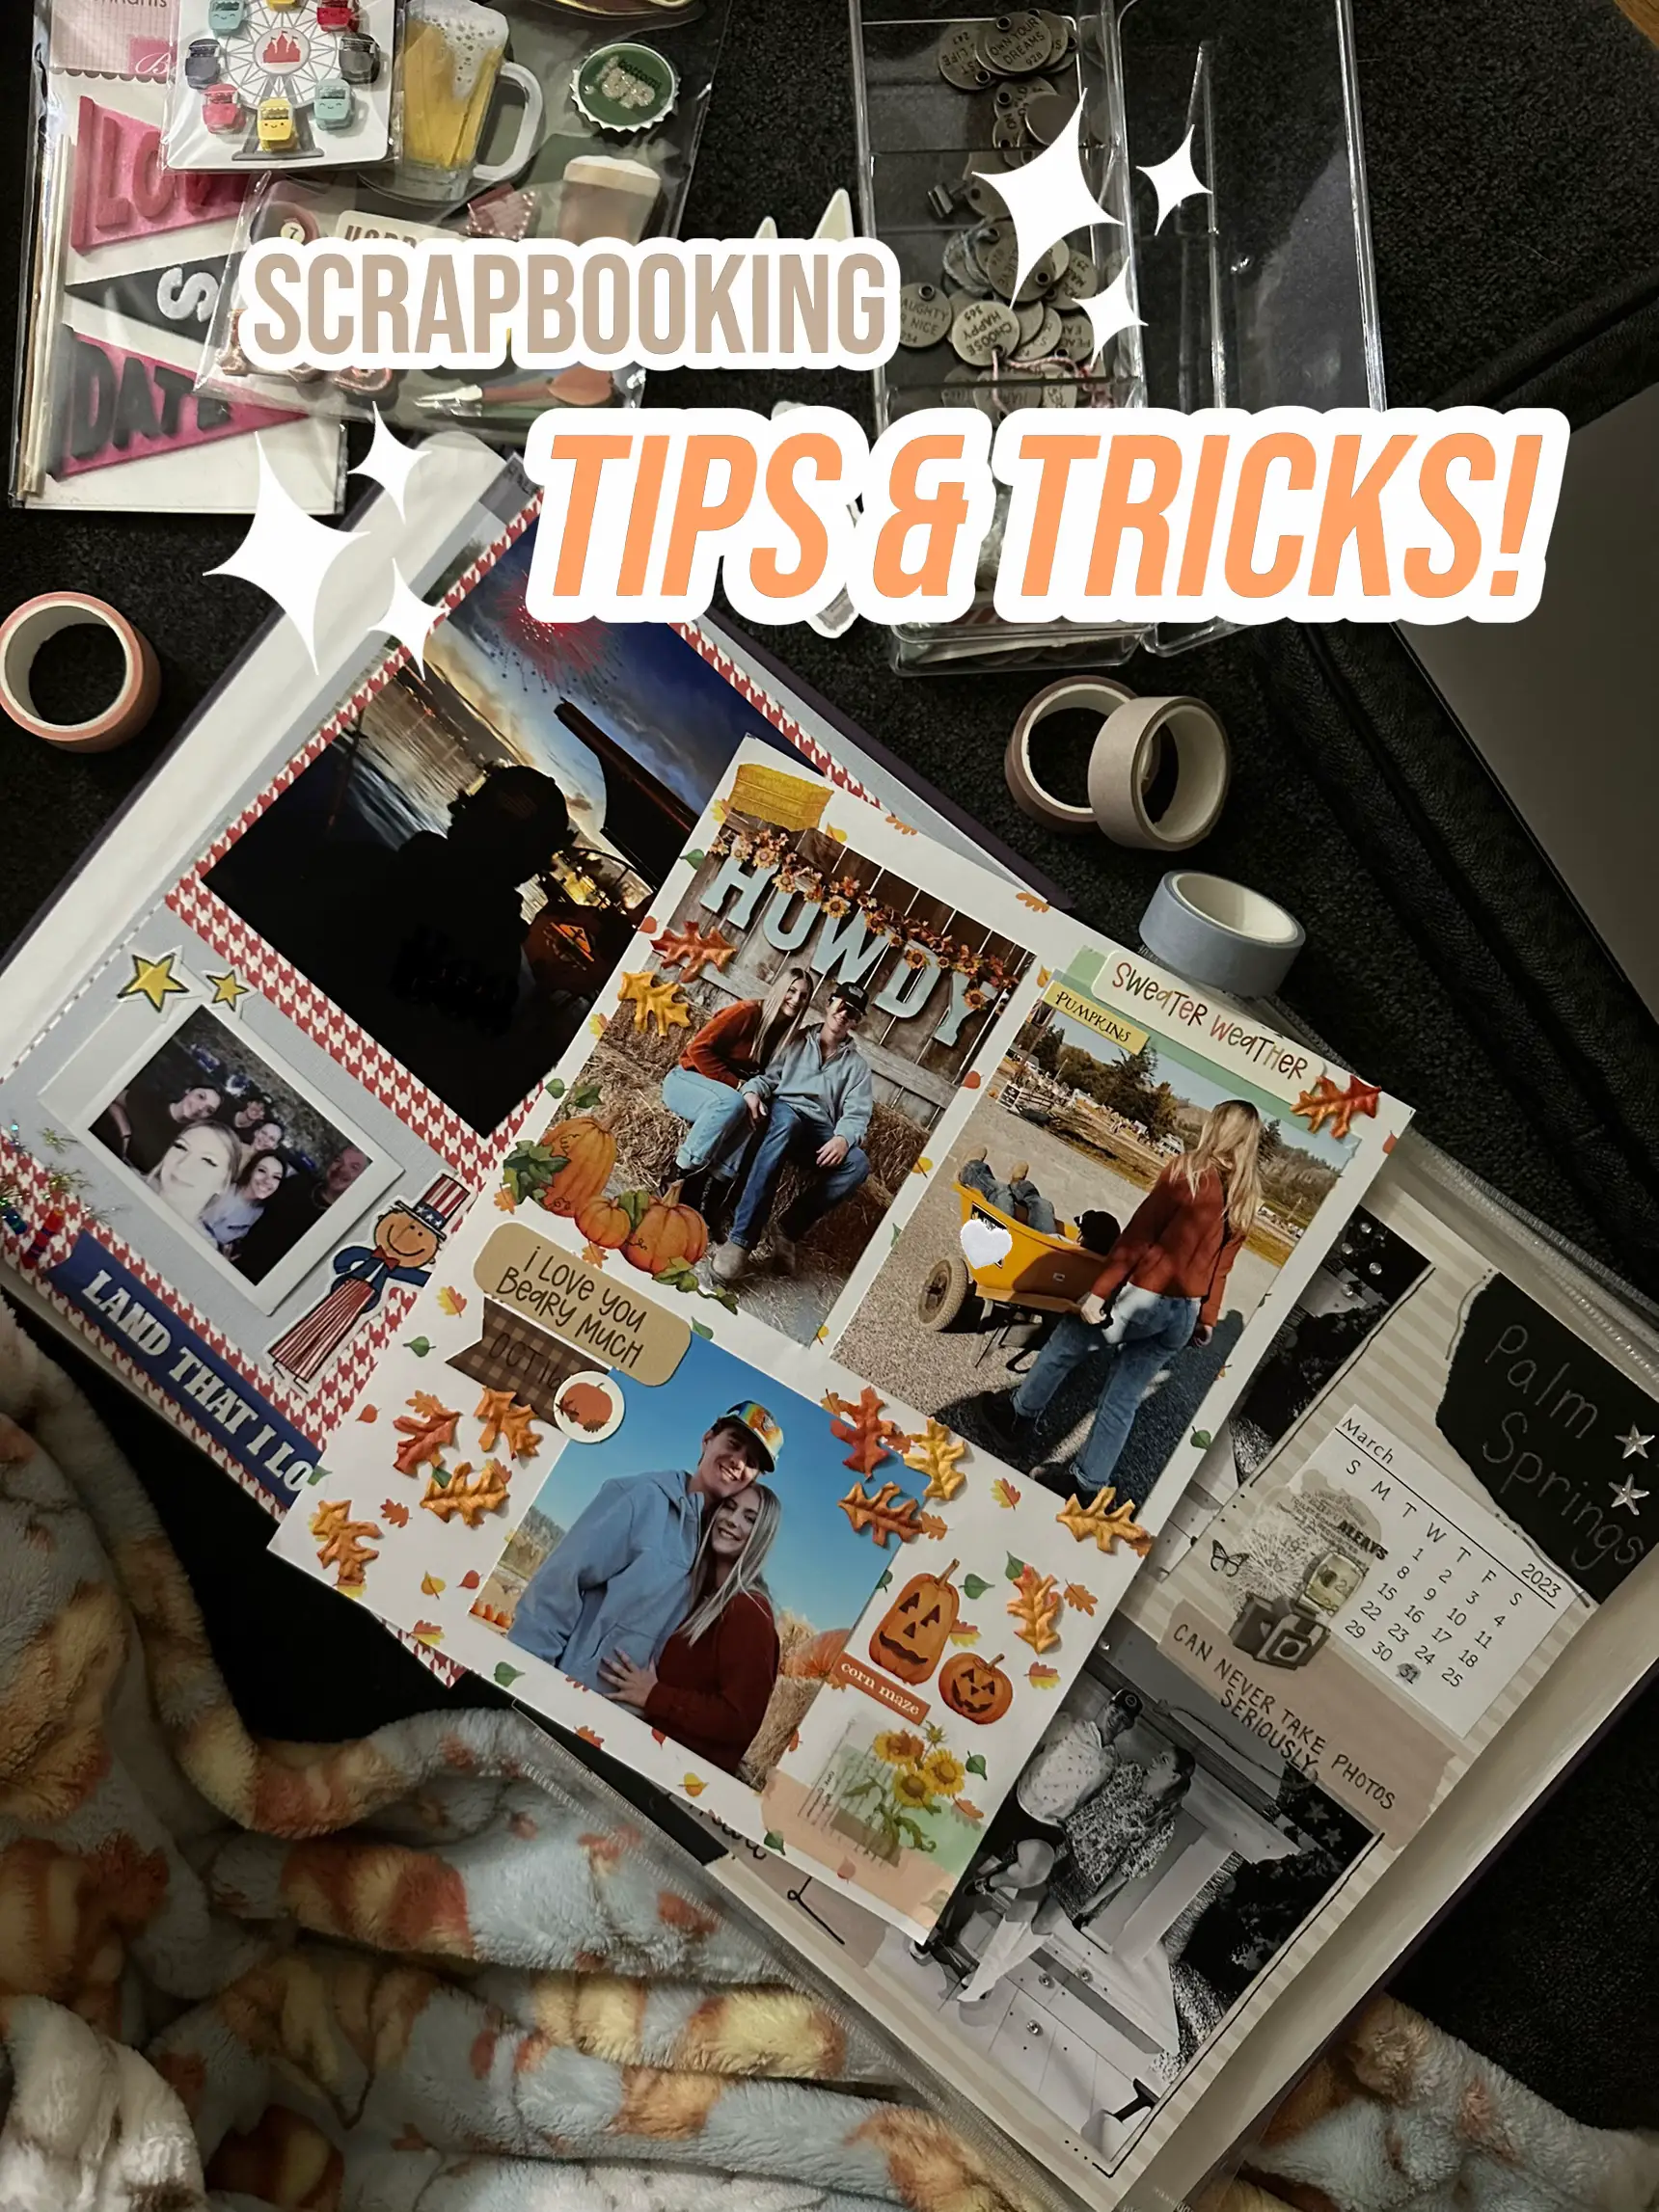 25 great photo of scrapbook ideas for couples 1 - #couples #great